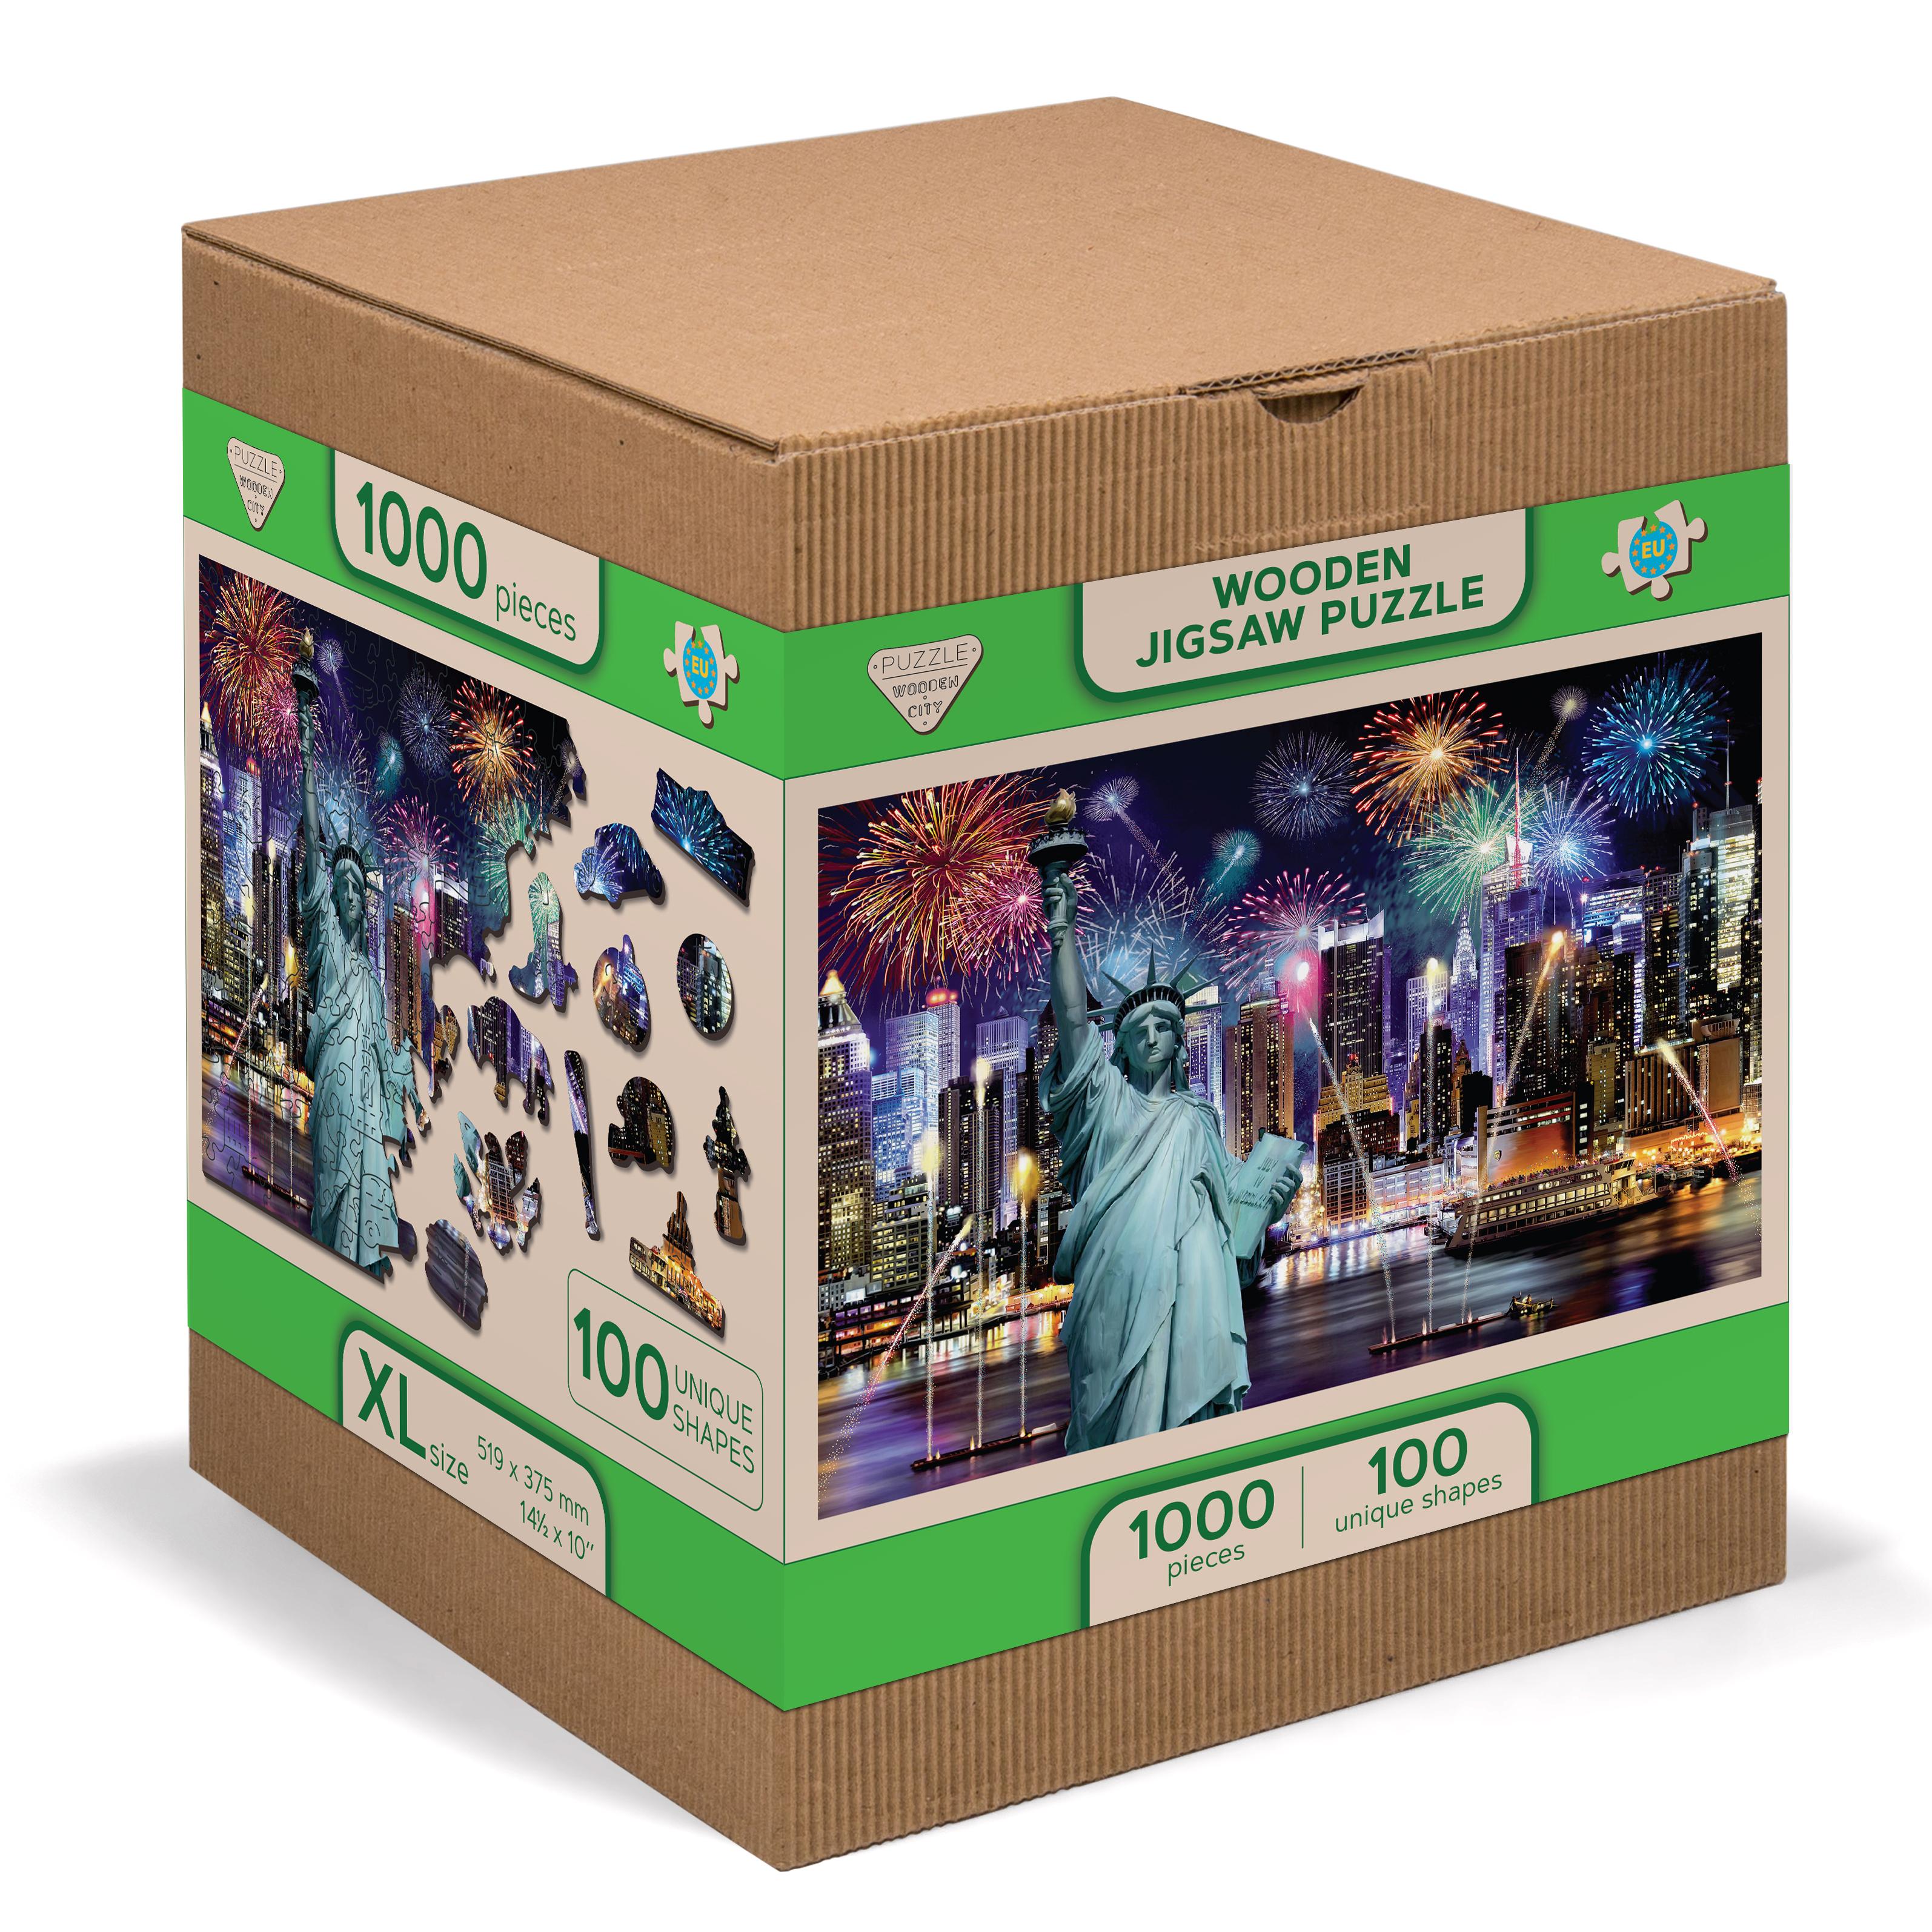 Wooden Puzzle with Figures - New York City at night size XL, 1000 pieces